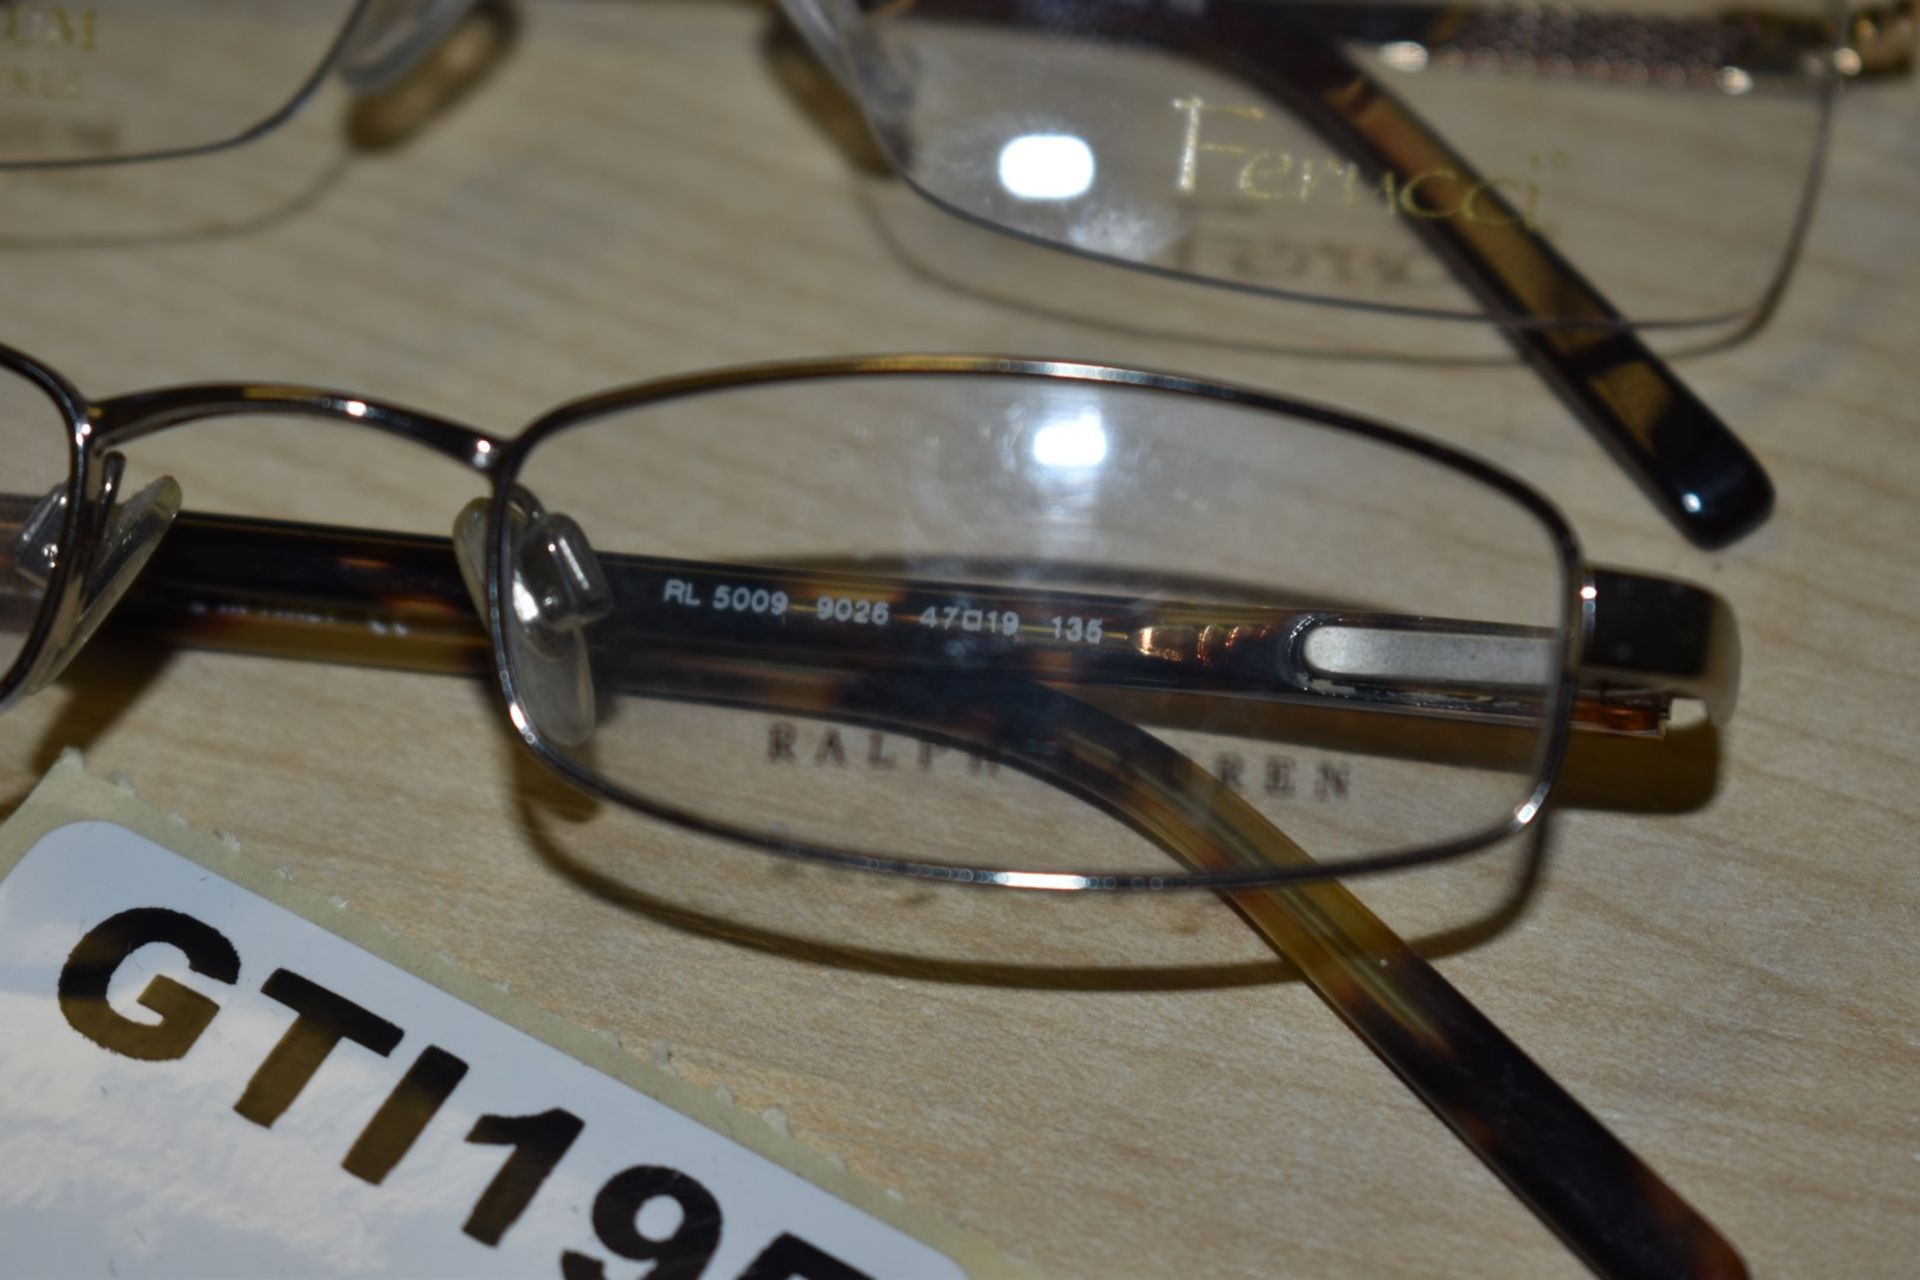 6 x Assorted Pairs of Designer Spectacle Eye Glasses - Ex Display Stock - Brands Include Jeff Banks, - Image 4 of 10